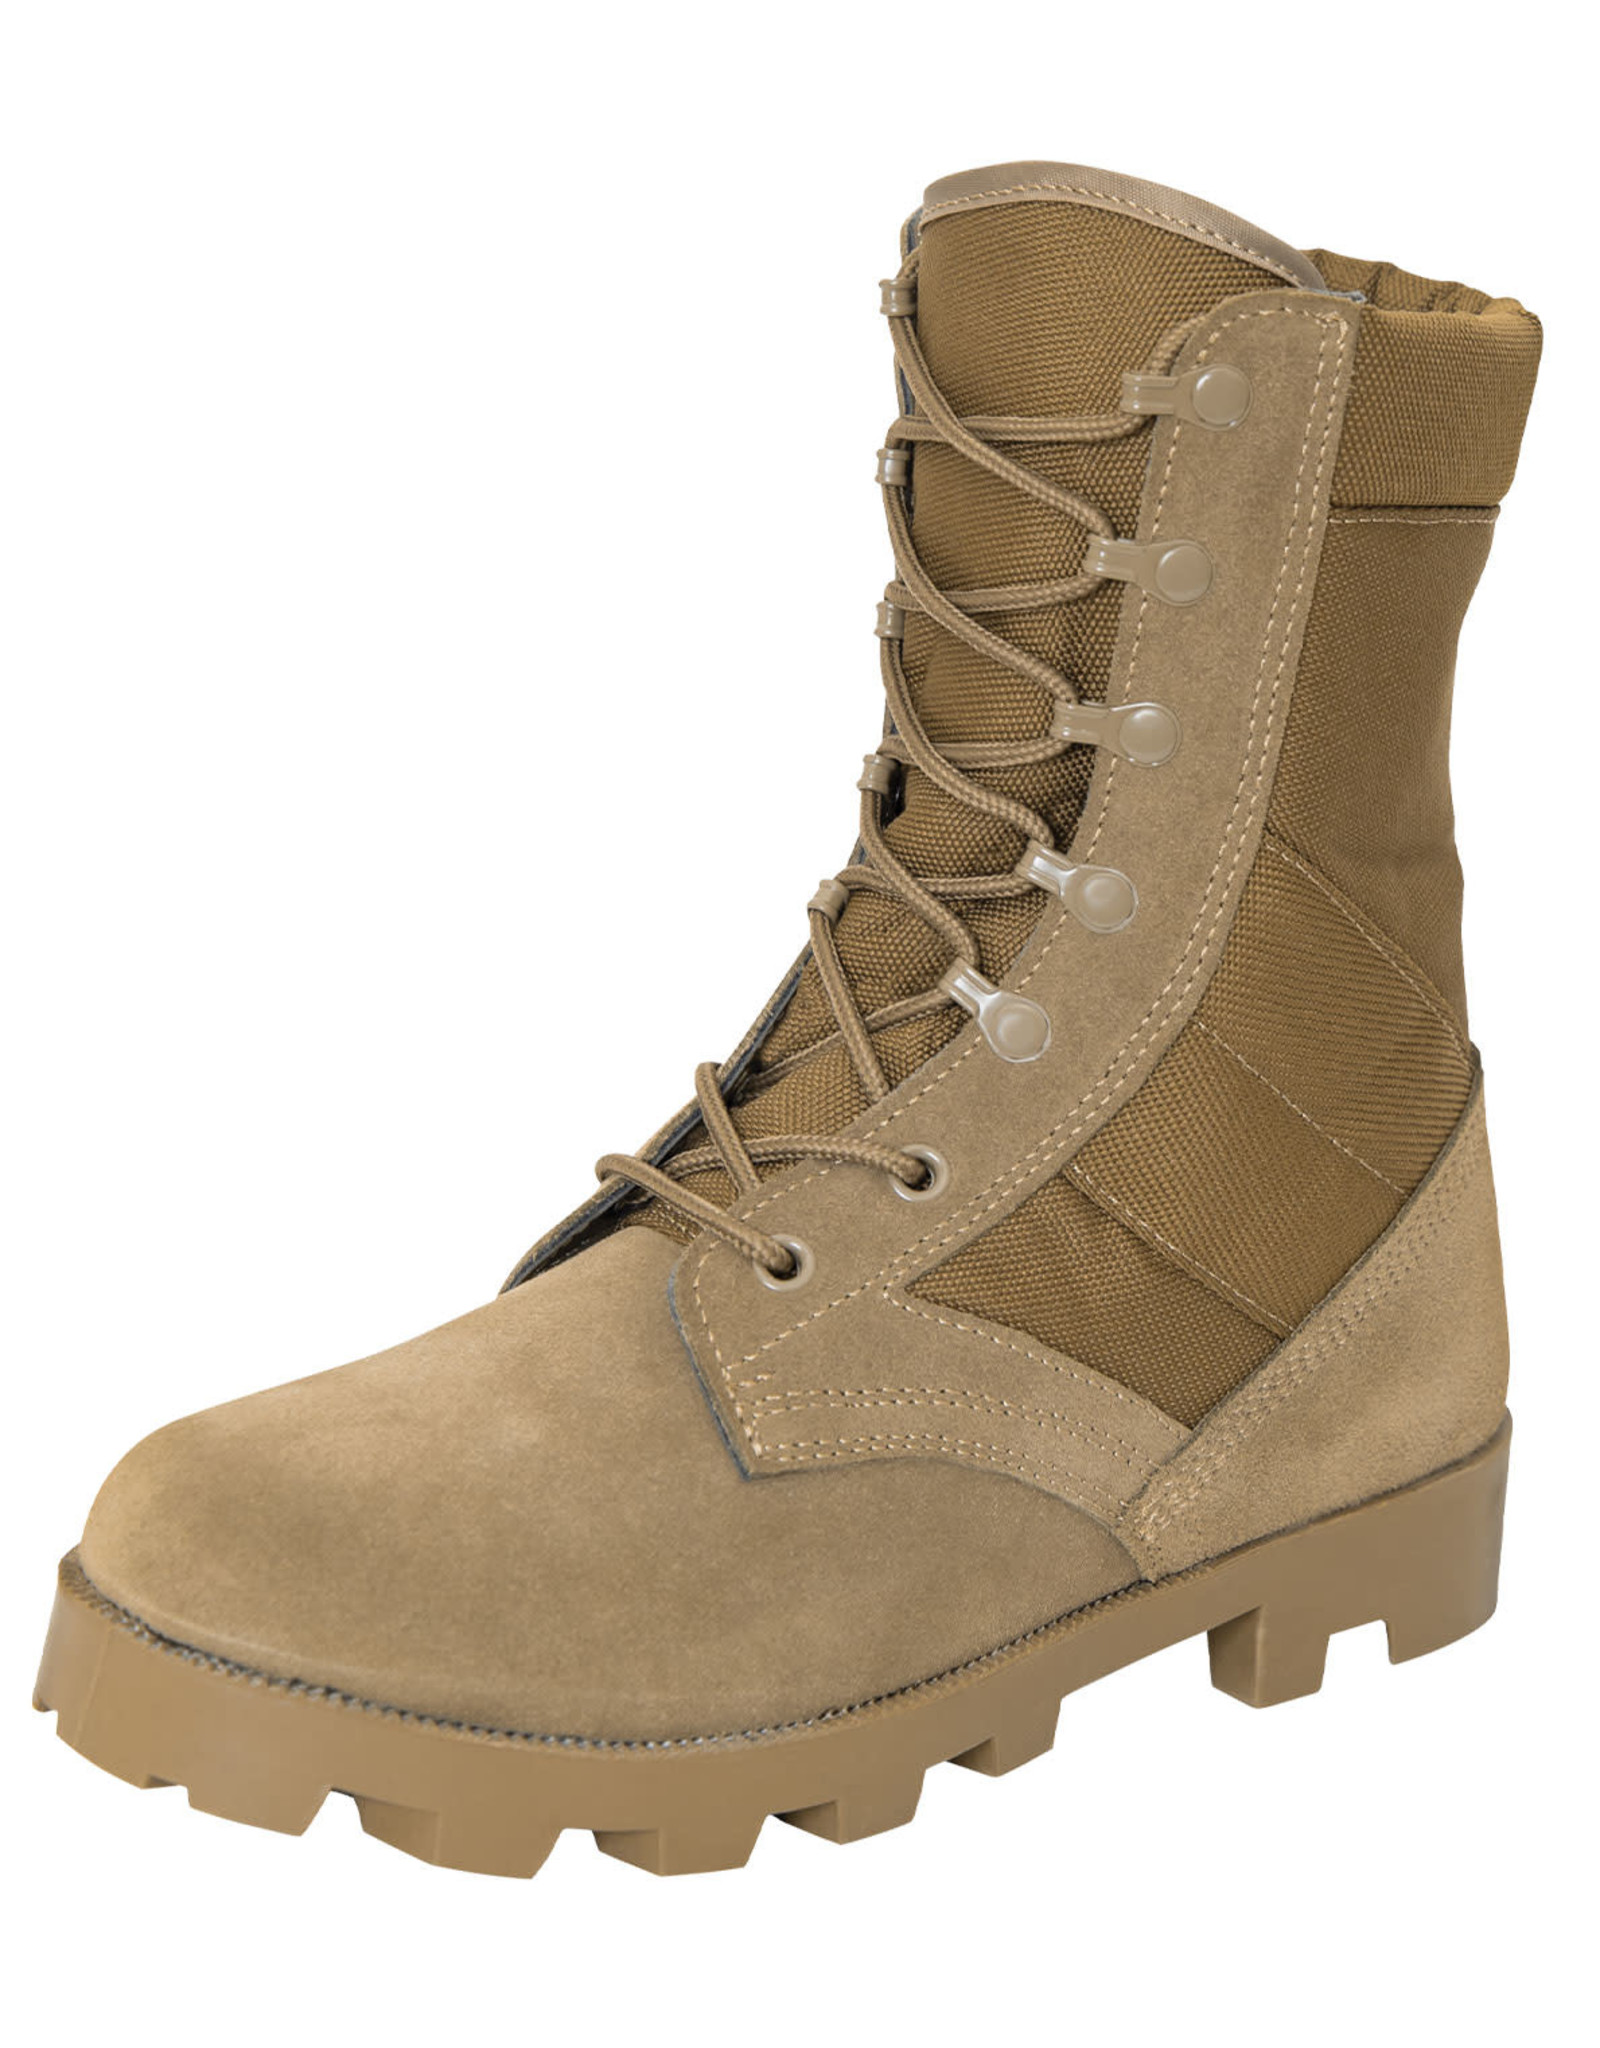 Speedlace Jungle Boots - Military Outlet